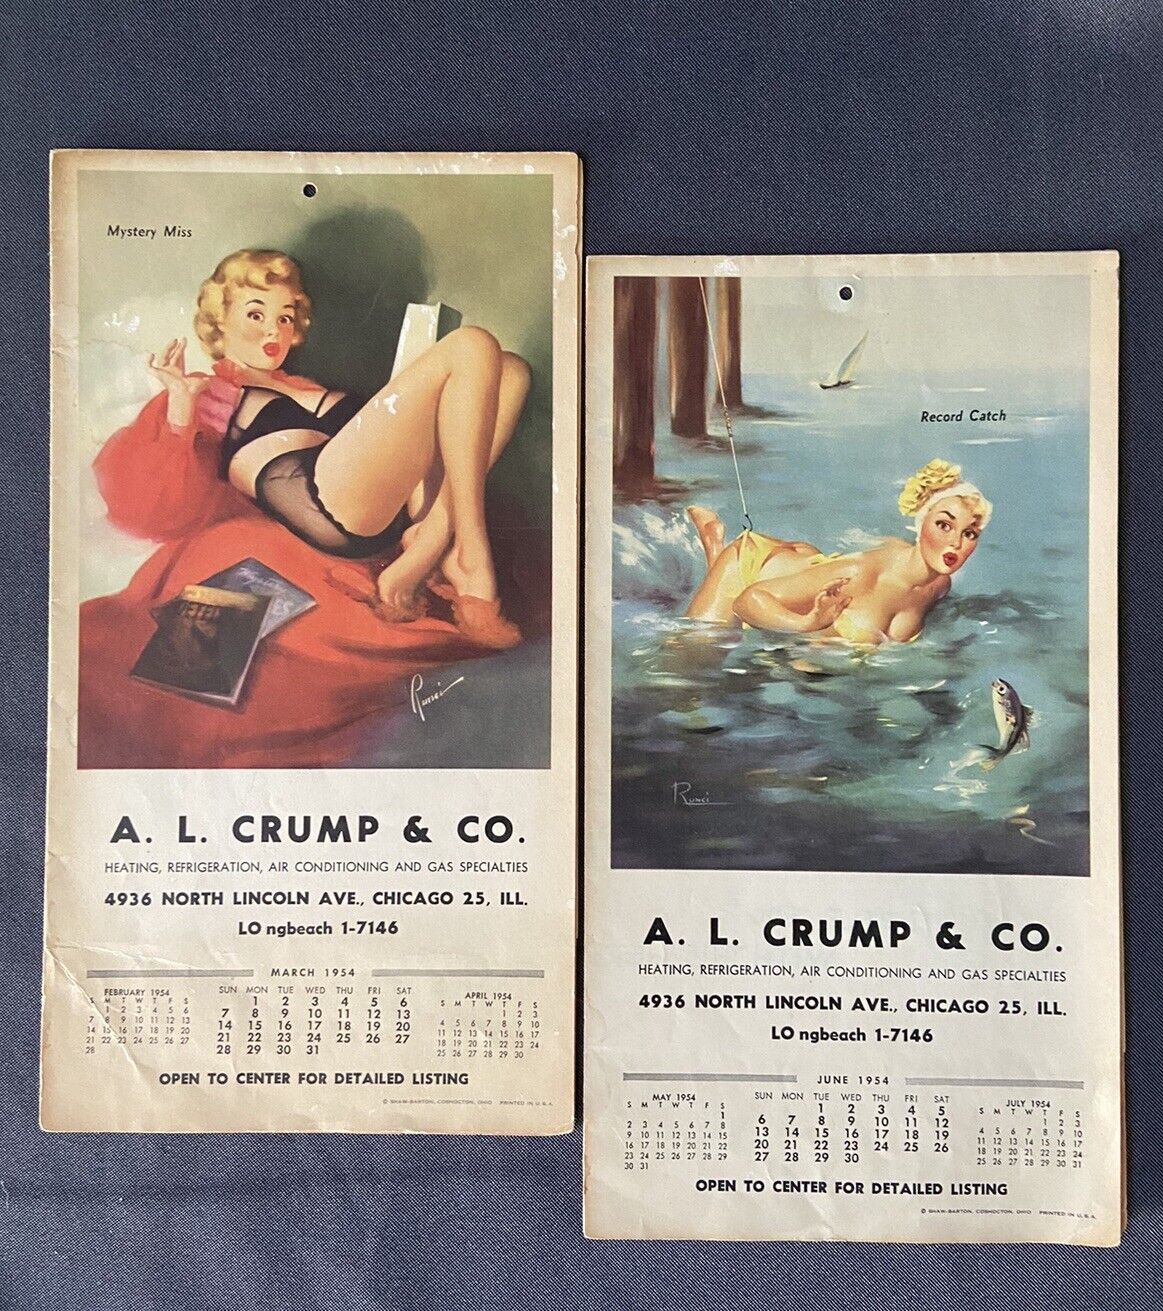 Pinup Girl Advertising Calendars A.L. Crump & Co, Chicago 1954 March and June